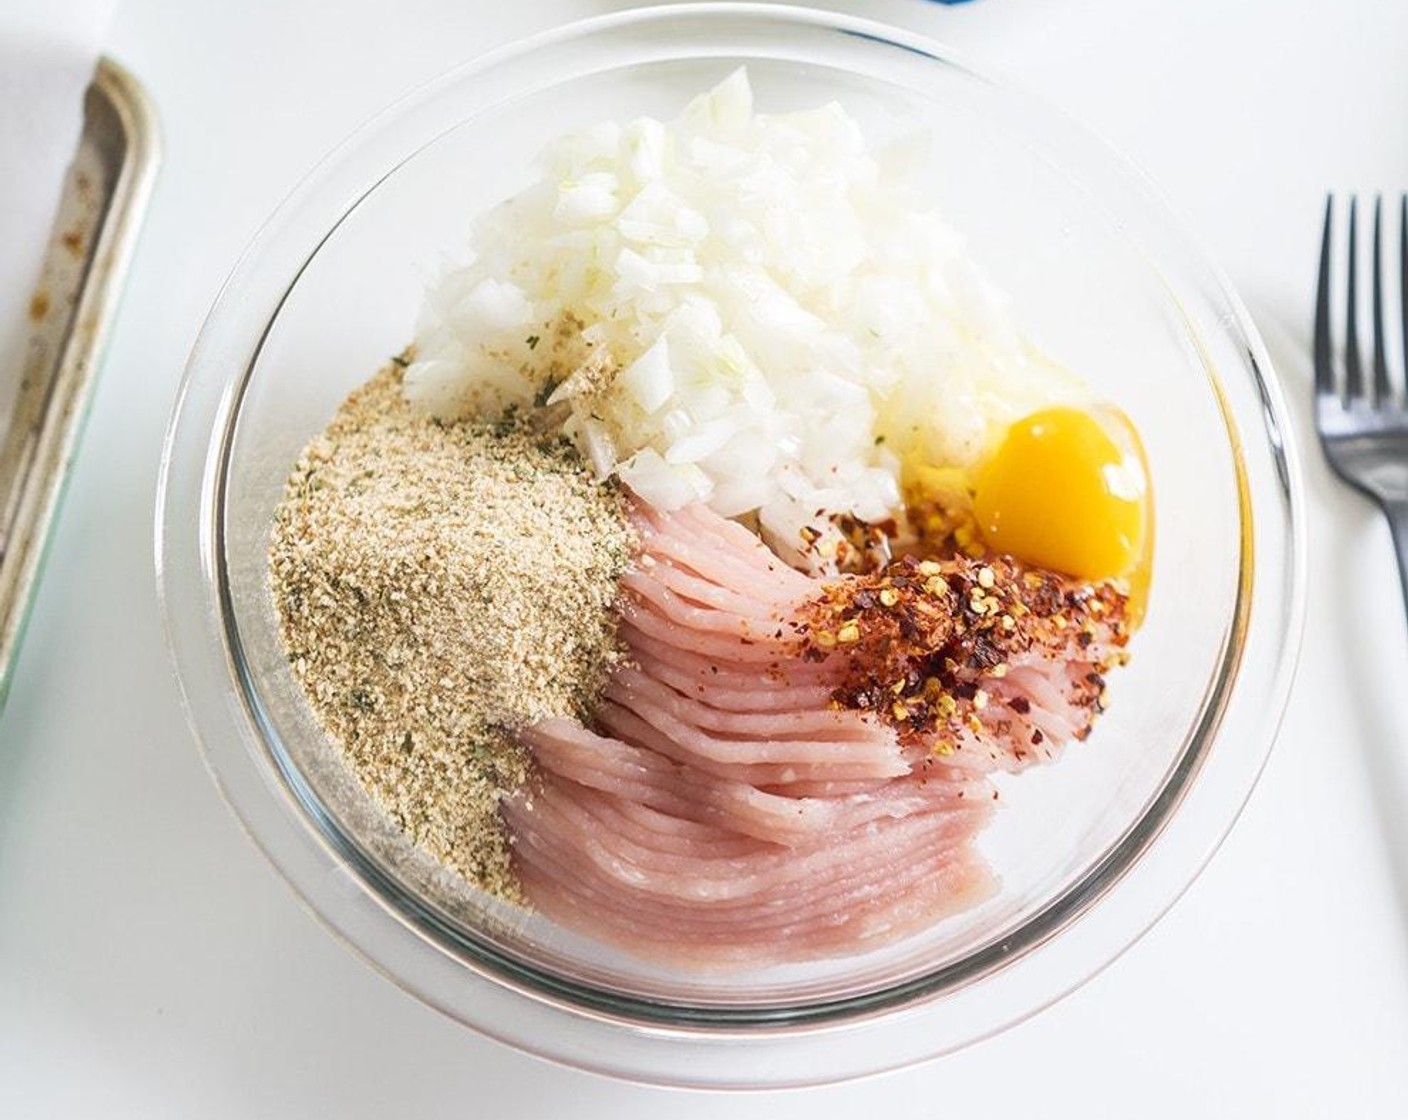 step 1 In a bowl, combine ground Lean Ground Turkey Breast (1 pckg), Yellow Onion (1), Garlic (2 cloves), Seasoned Panko Breadcrumbs (1/3 cup), Parmesan Cheese (1/4 cup), and Farmhouse Eggs® Large Brown Egg (1).